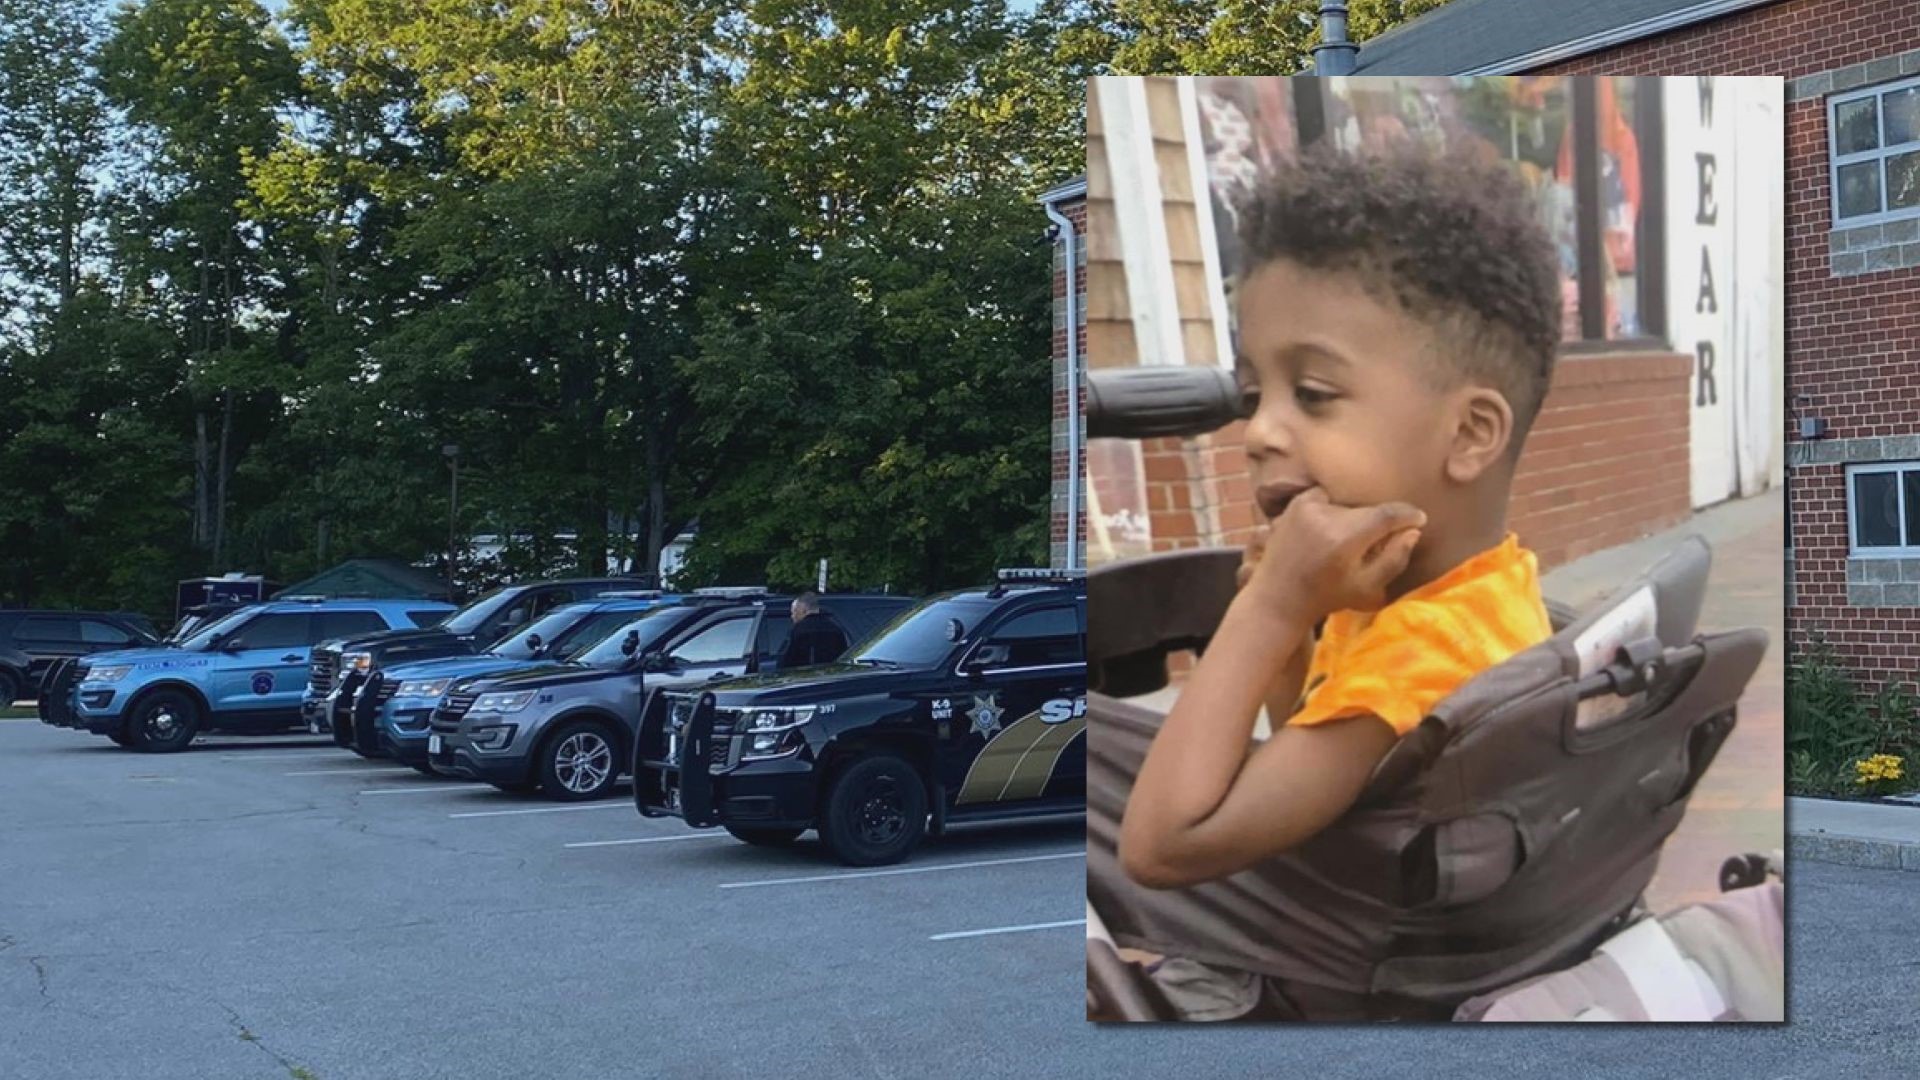 Windham police say Sulaiman Muhiddin, 4, who was non-verbal, was found dead on June 24, 2021.